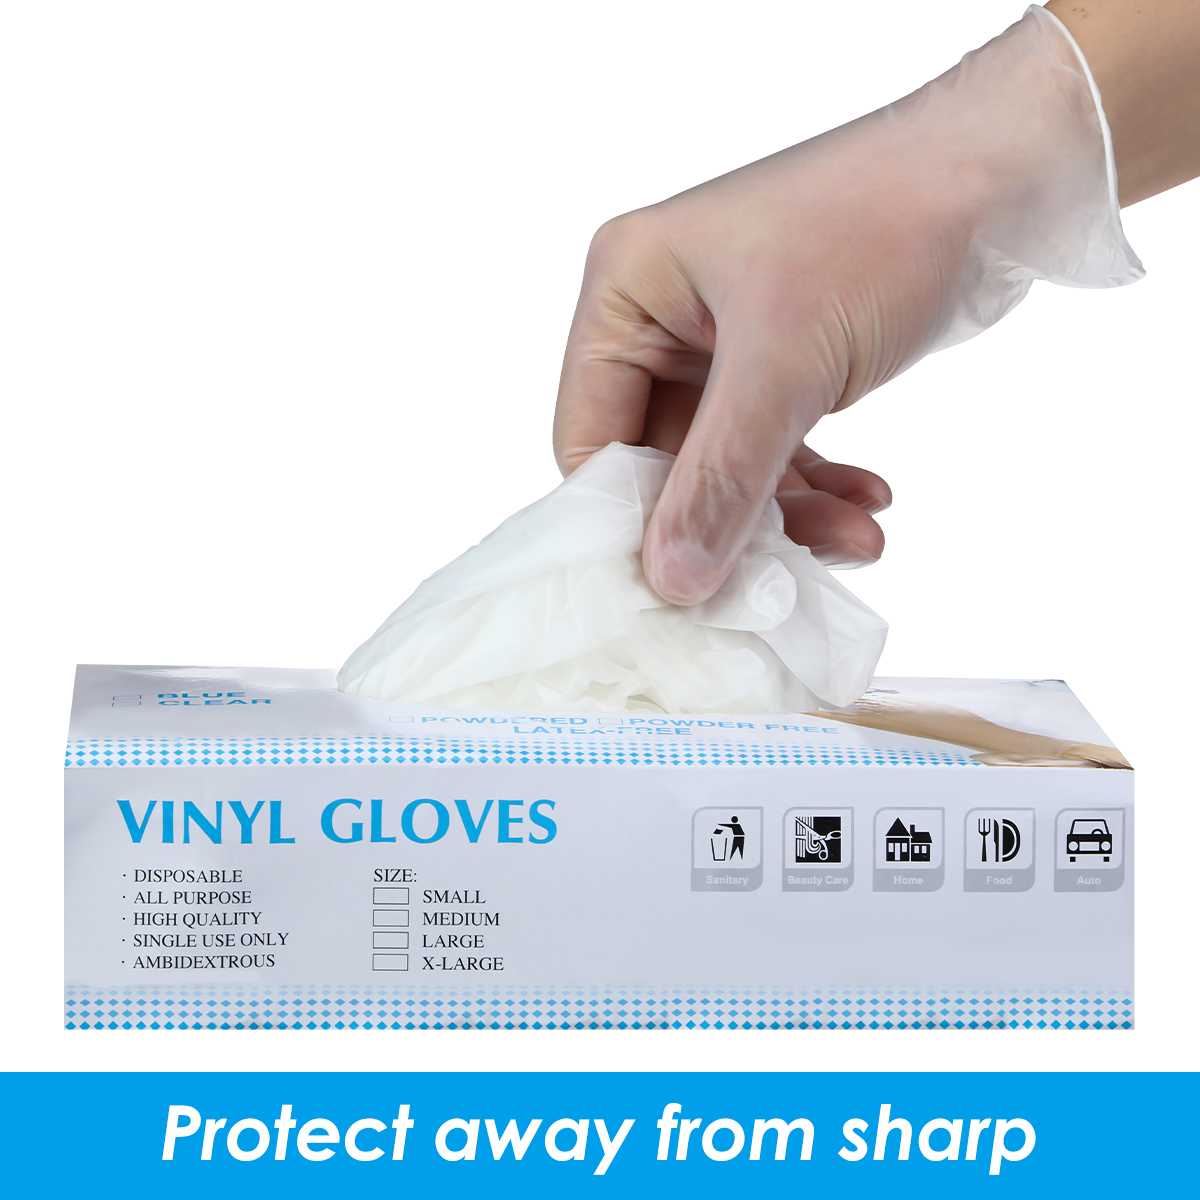 100-Pcs-Disposable-Latex-Free-Rubber-Gloves-Powder-Free-for-Industrial-Food-Service-Cleaning-and-Mor-1774256-3